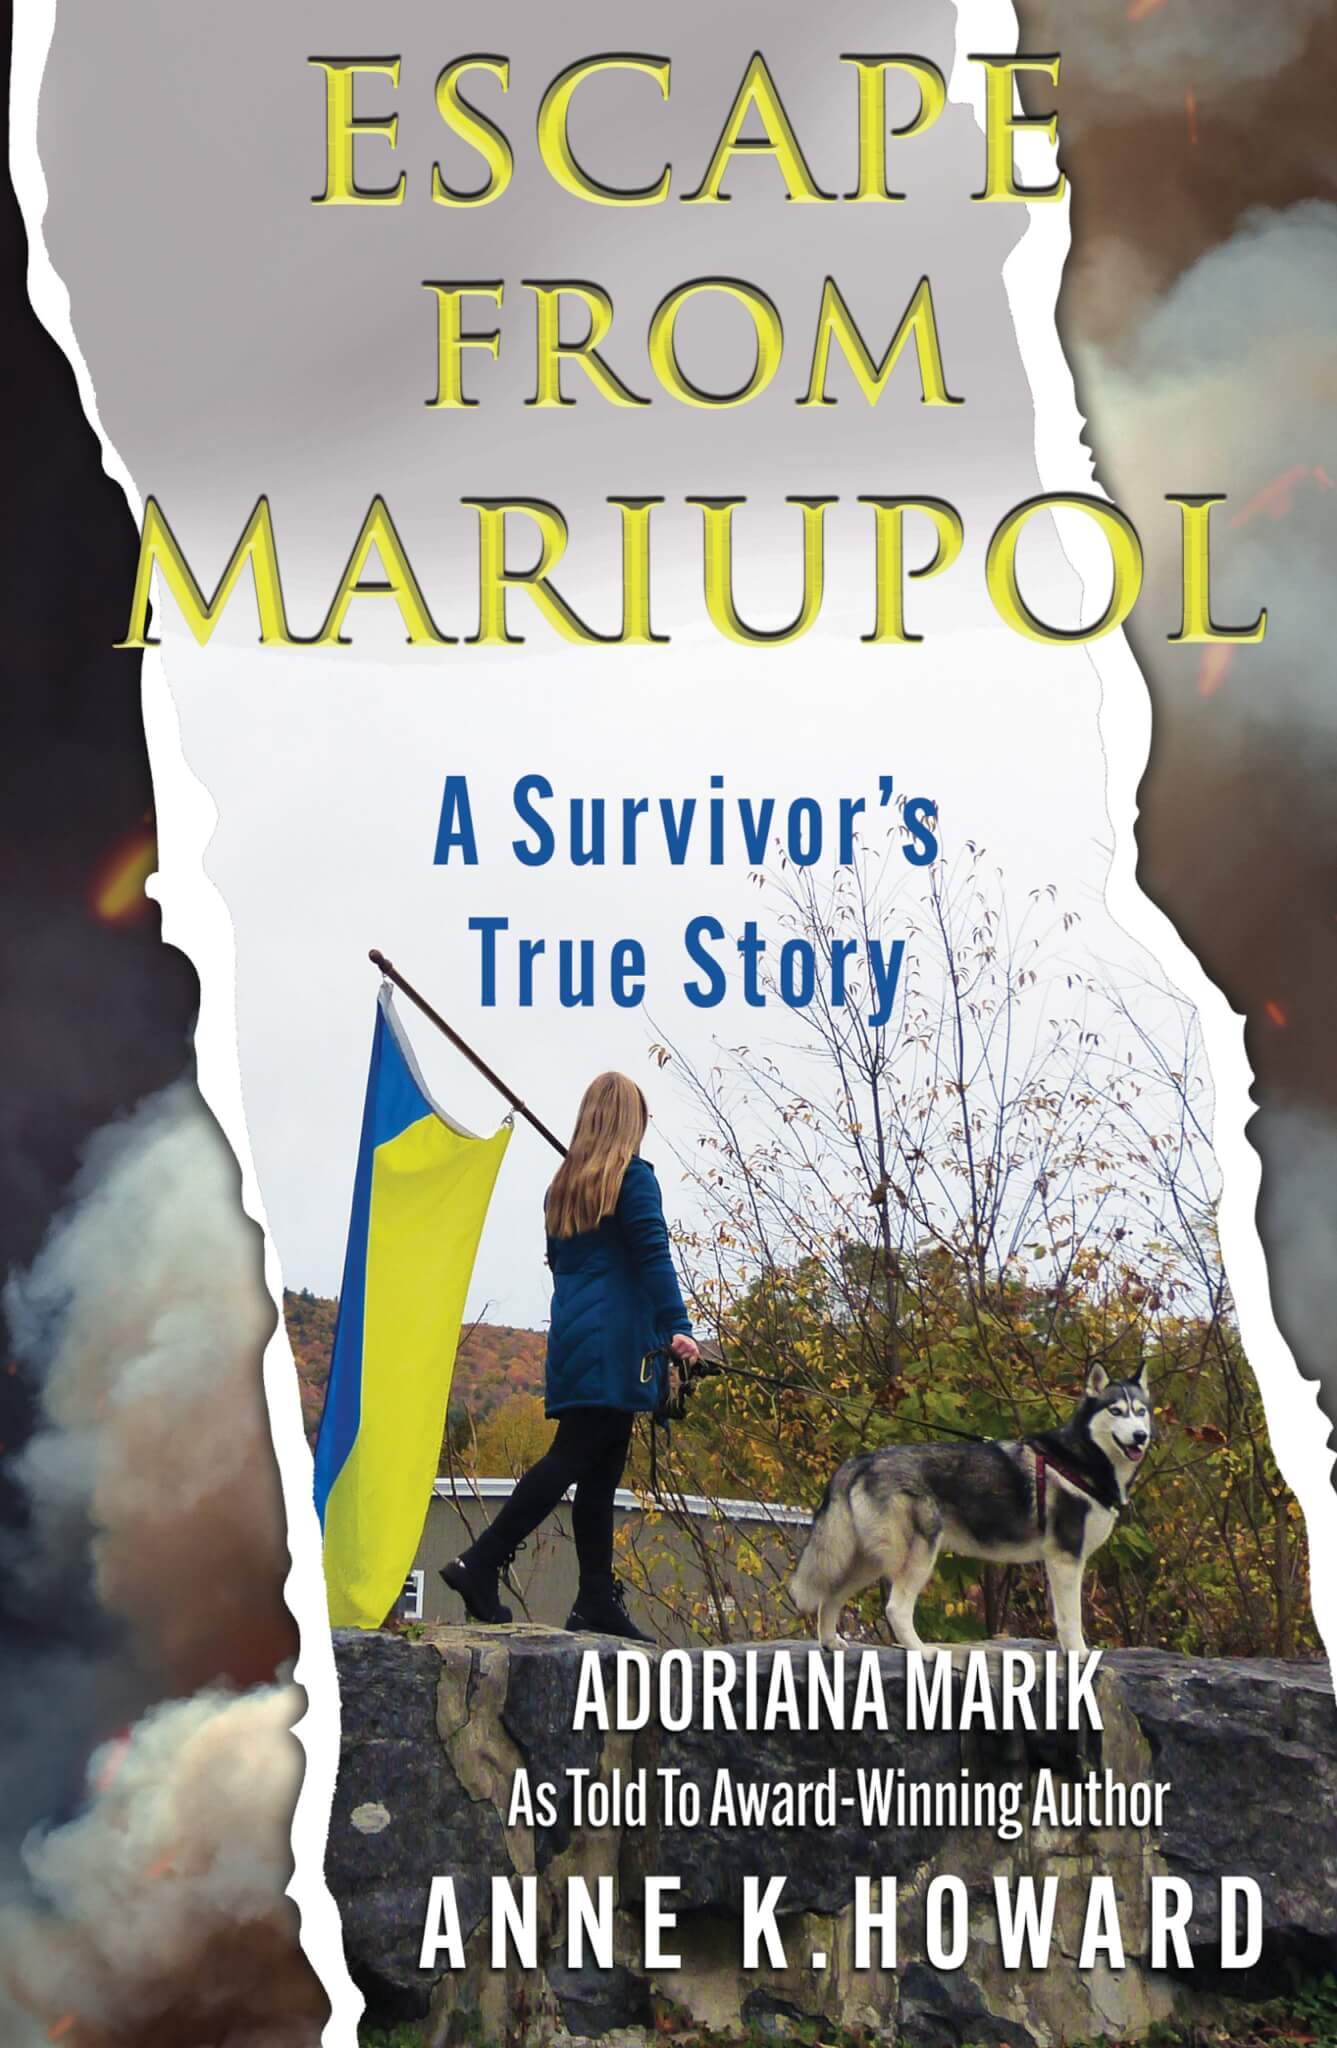 Escape from Mariupol: A Survivor's True Story Paperbacks Available